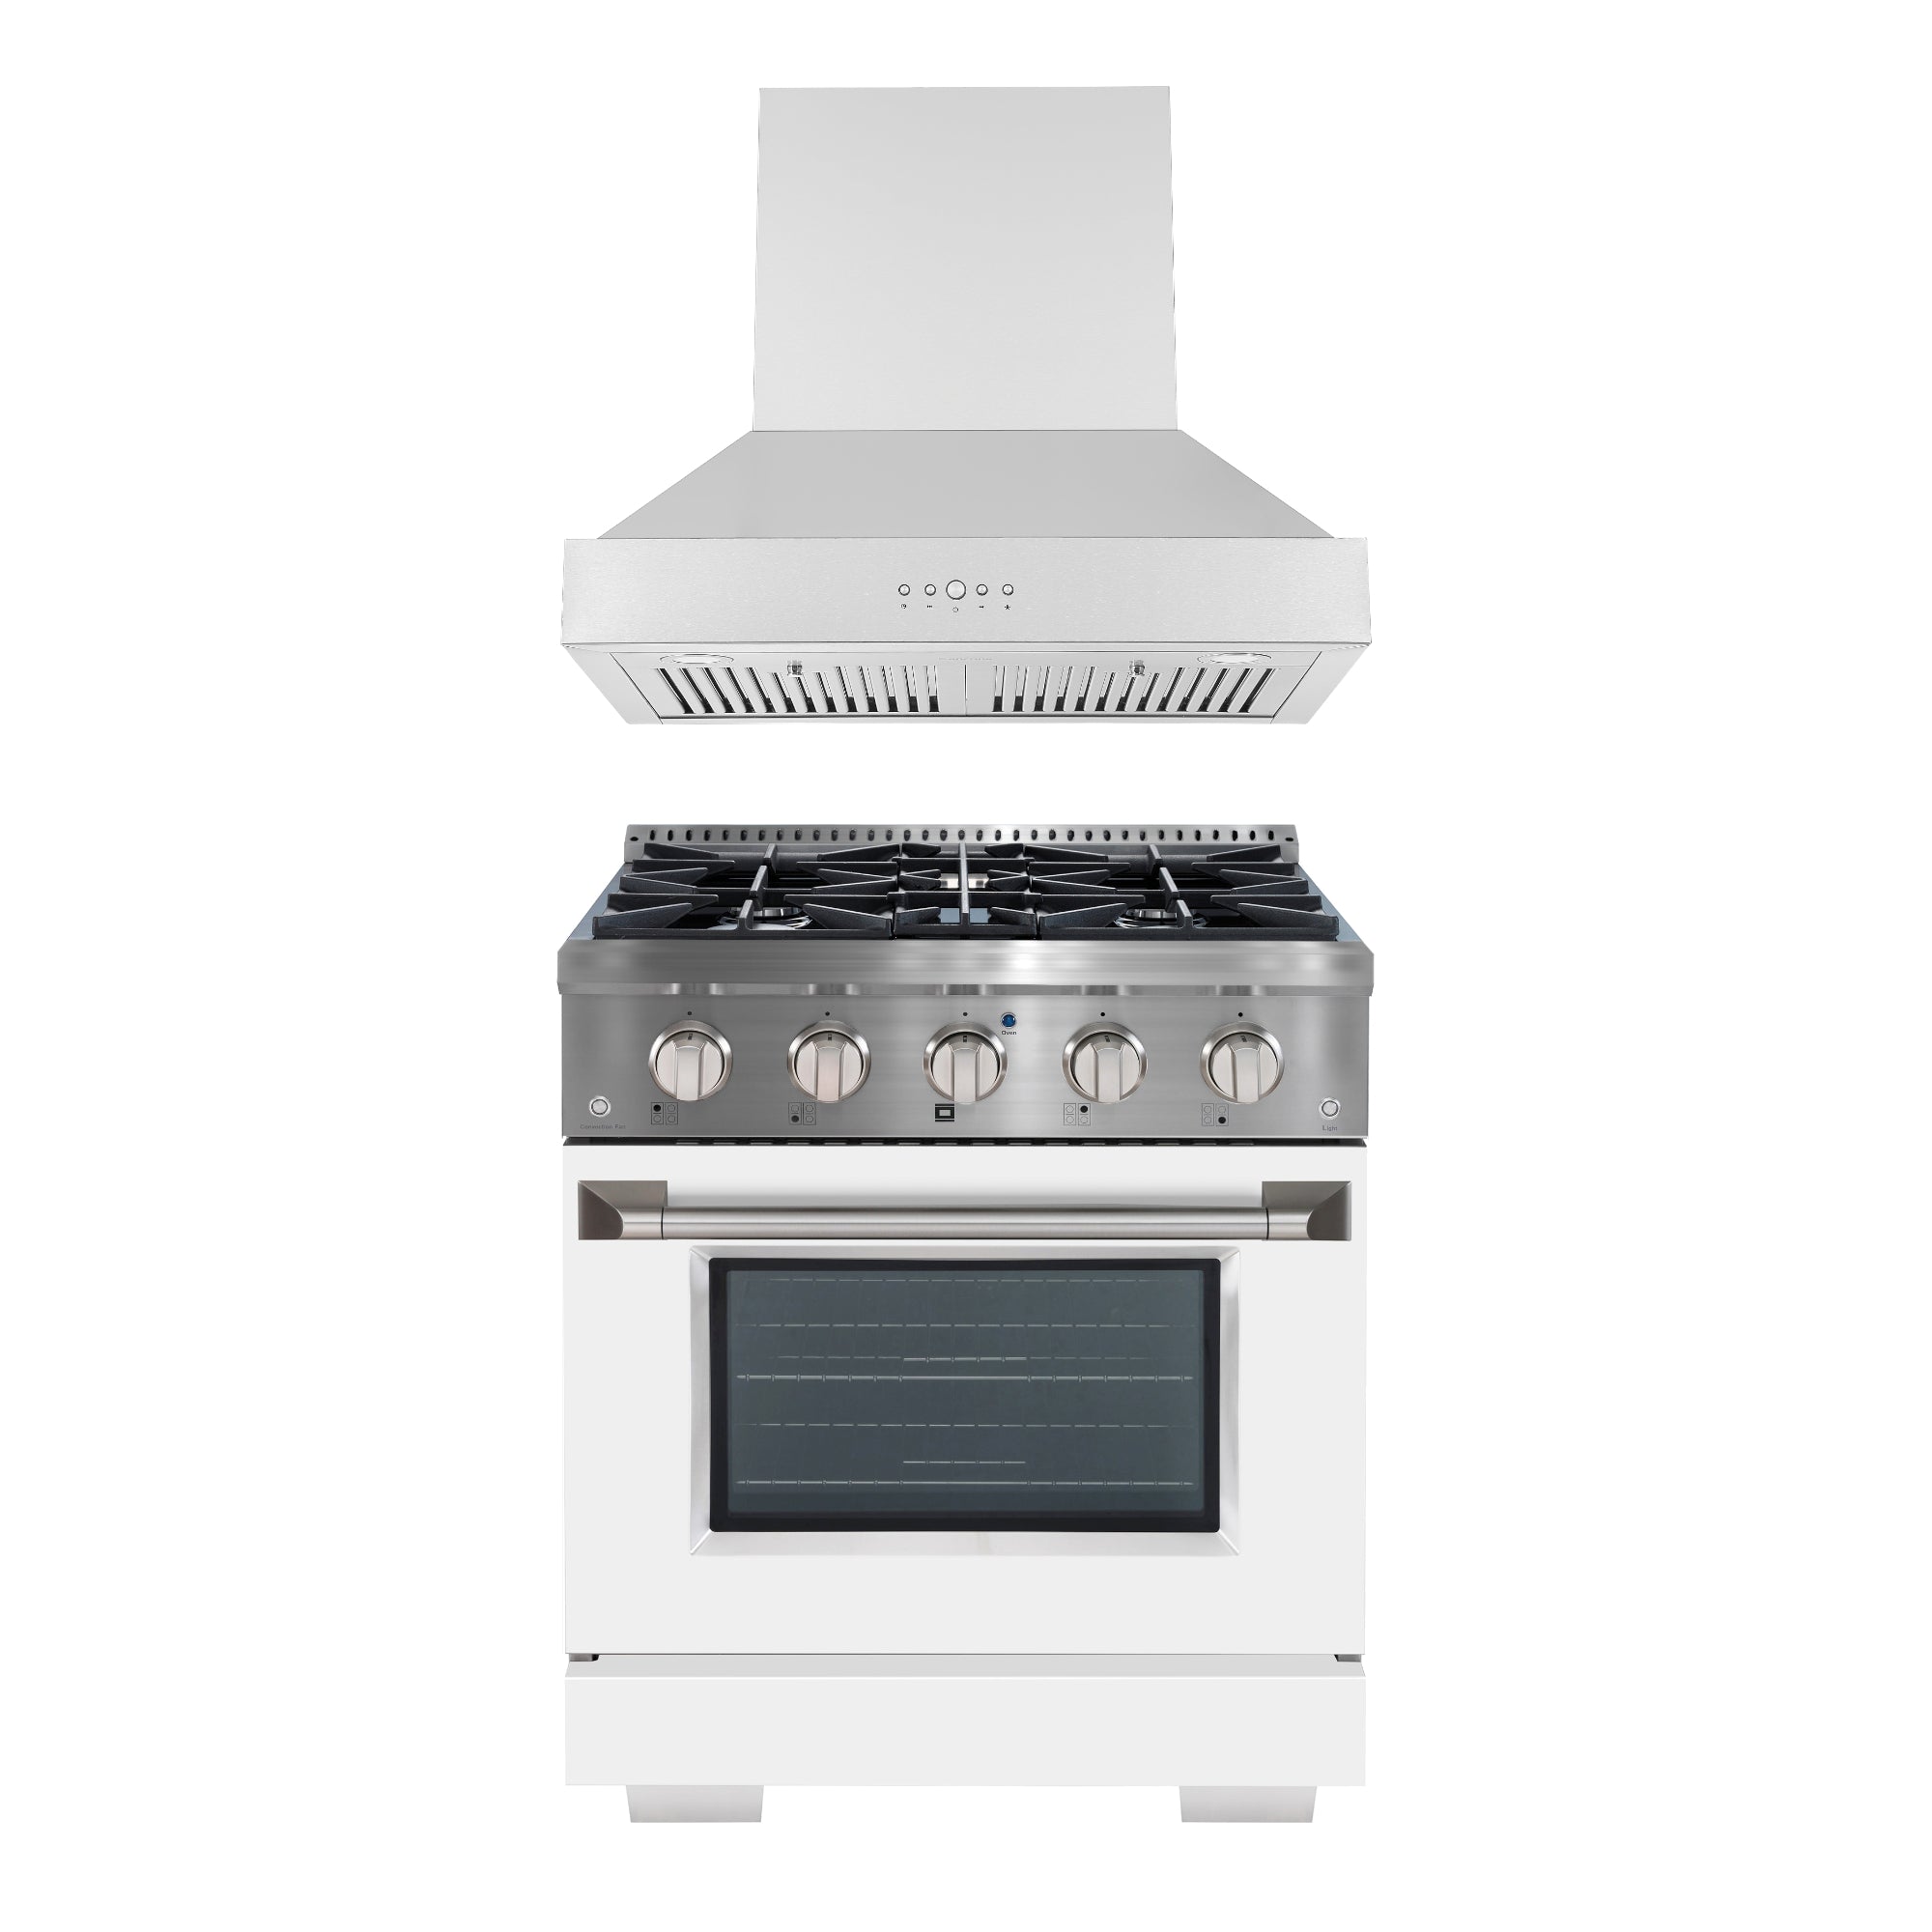 Ancona 2-piece Kitchen Appliance Package with 30” Dual Fuel Range with White Door and 600 CFM Wall-Mounted Range Hood